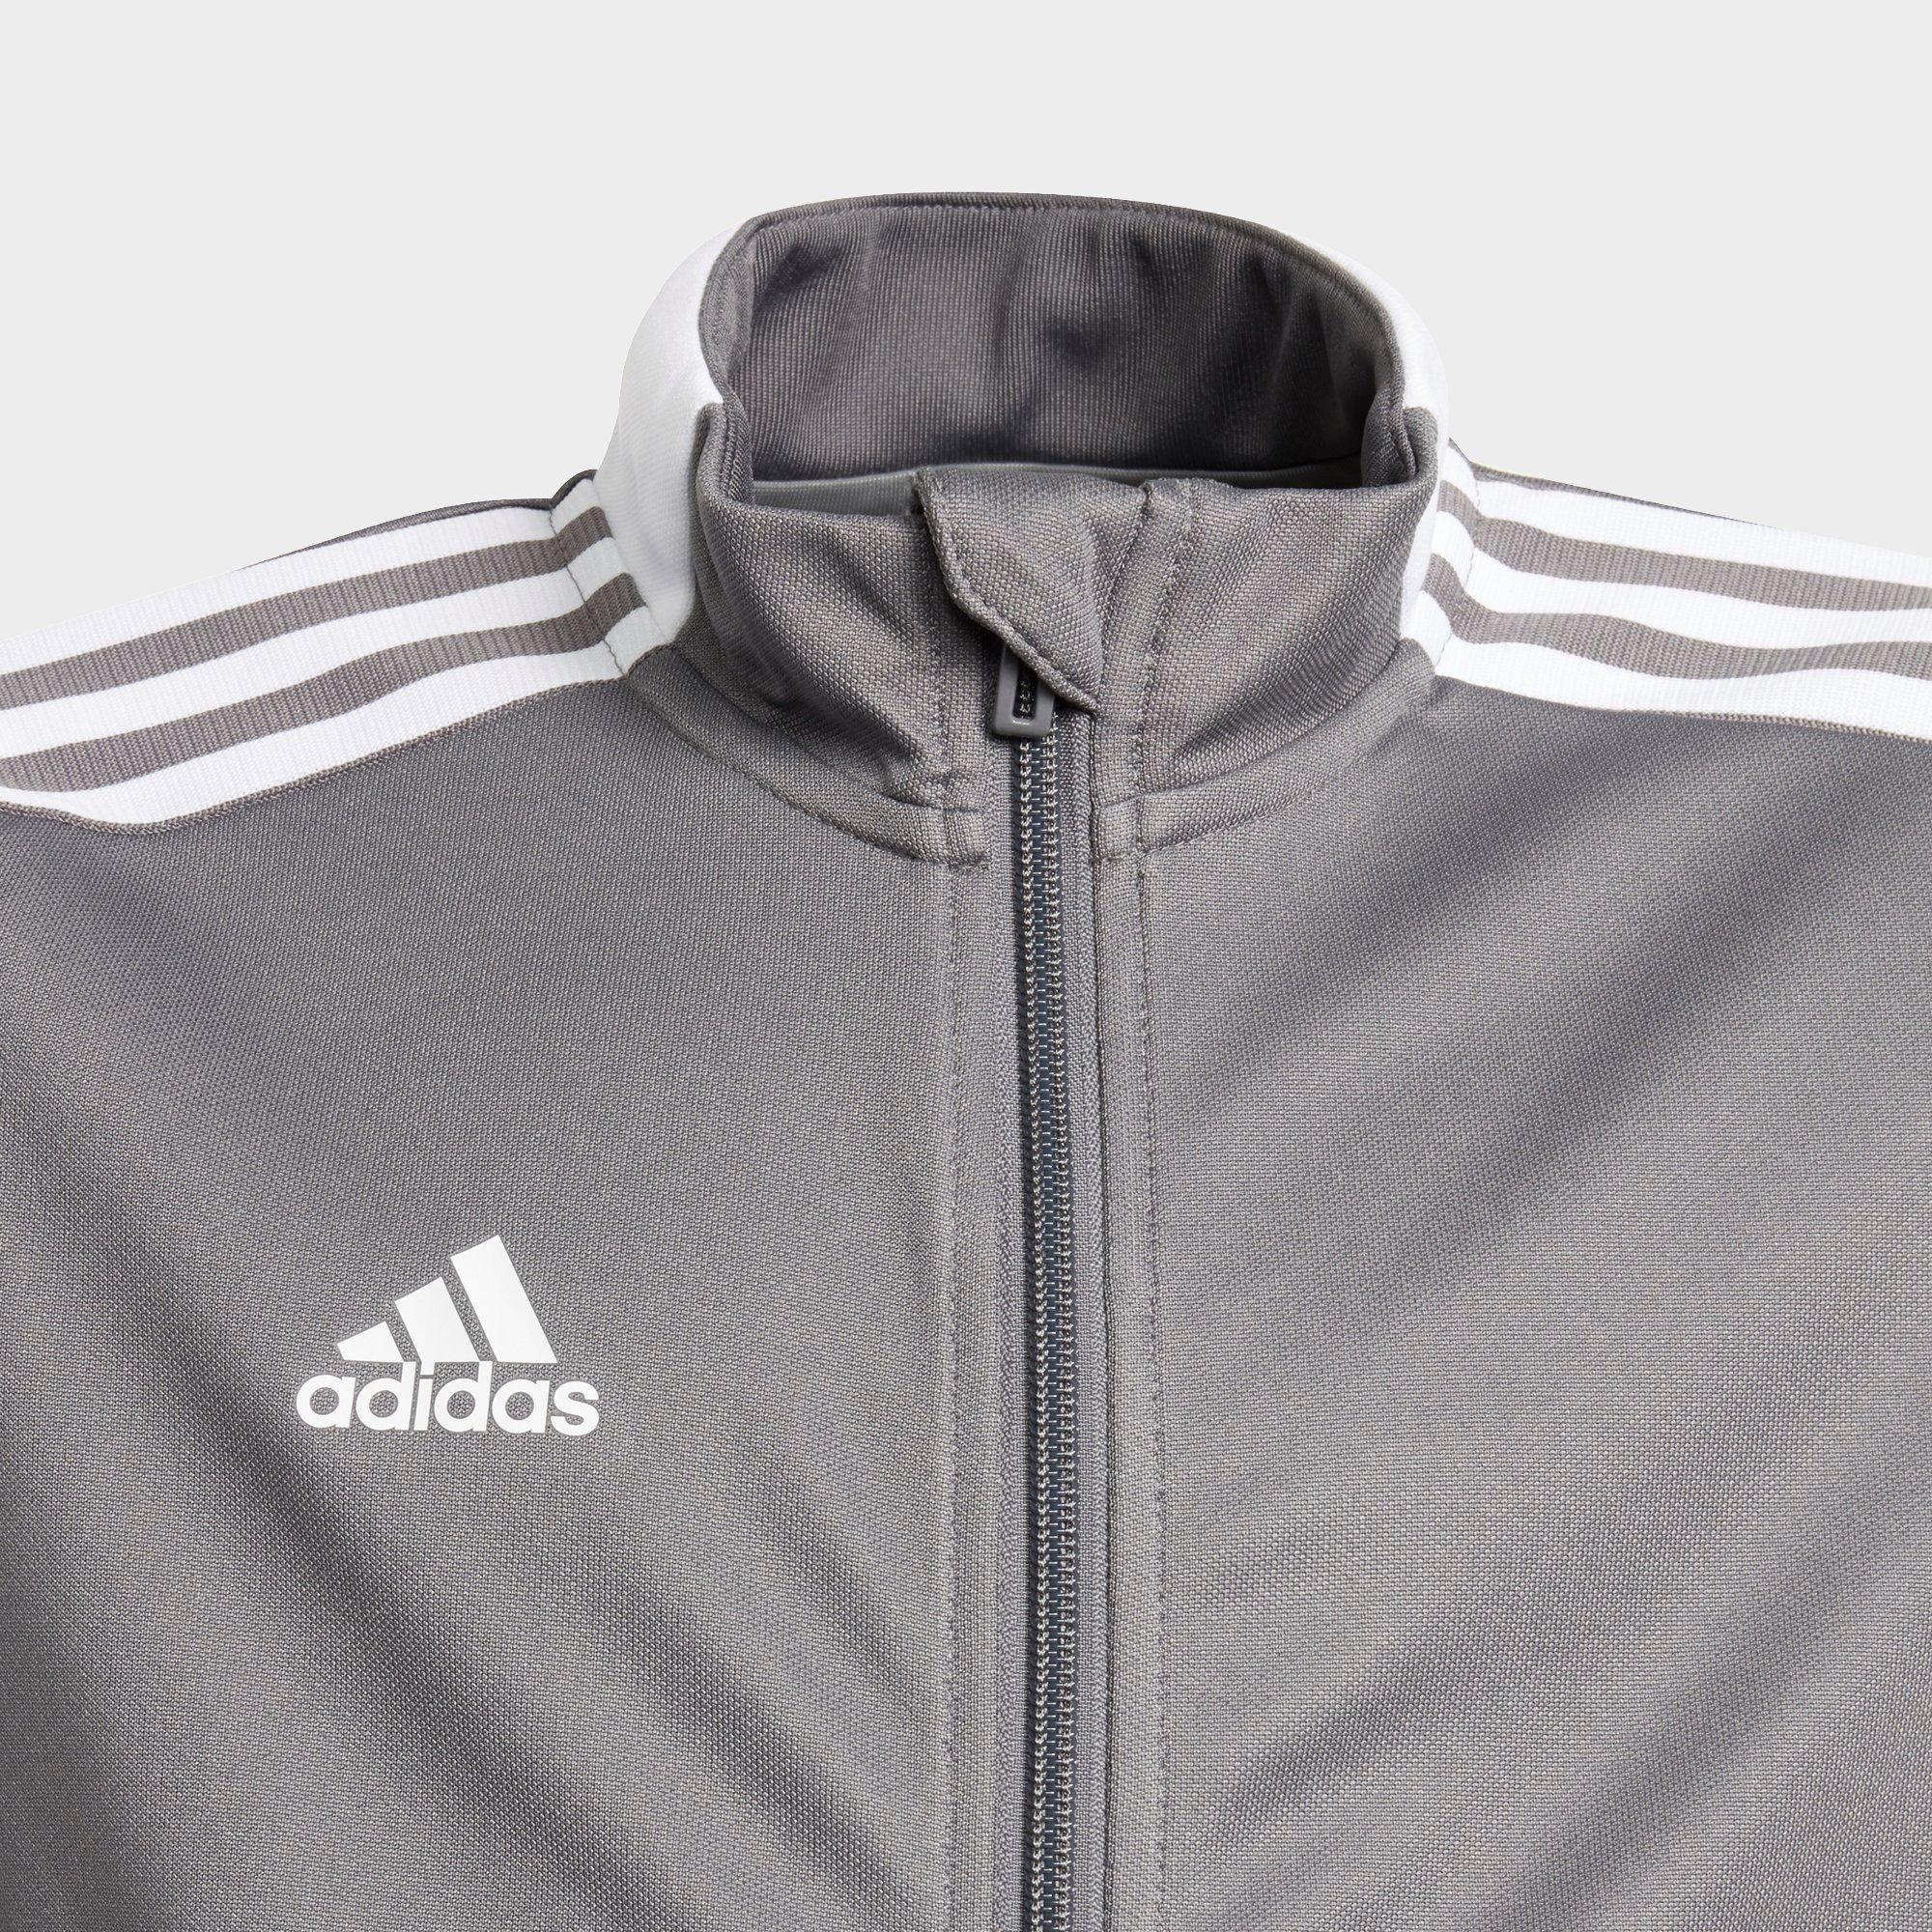 adidas jackets at lowest price